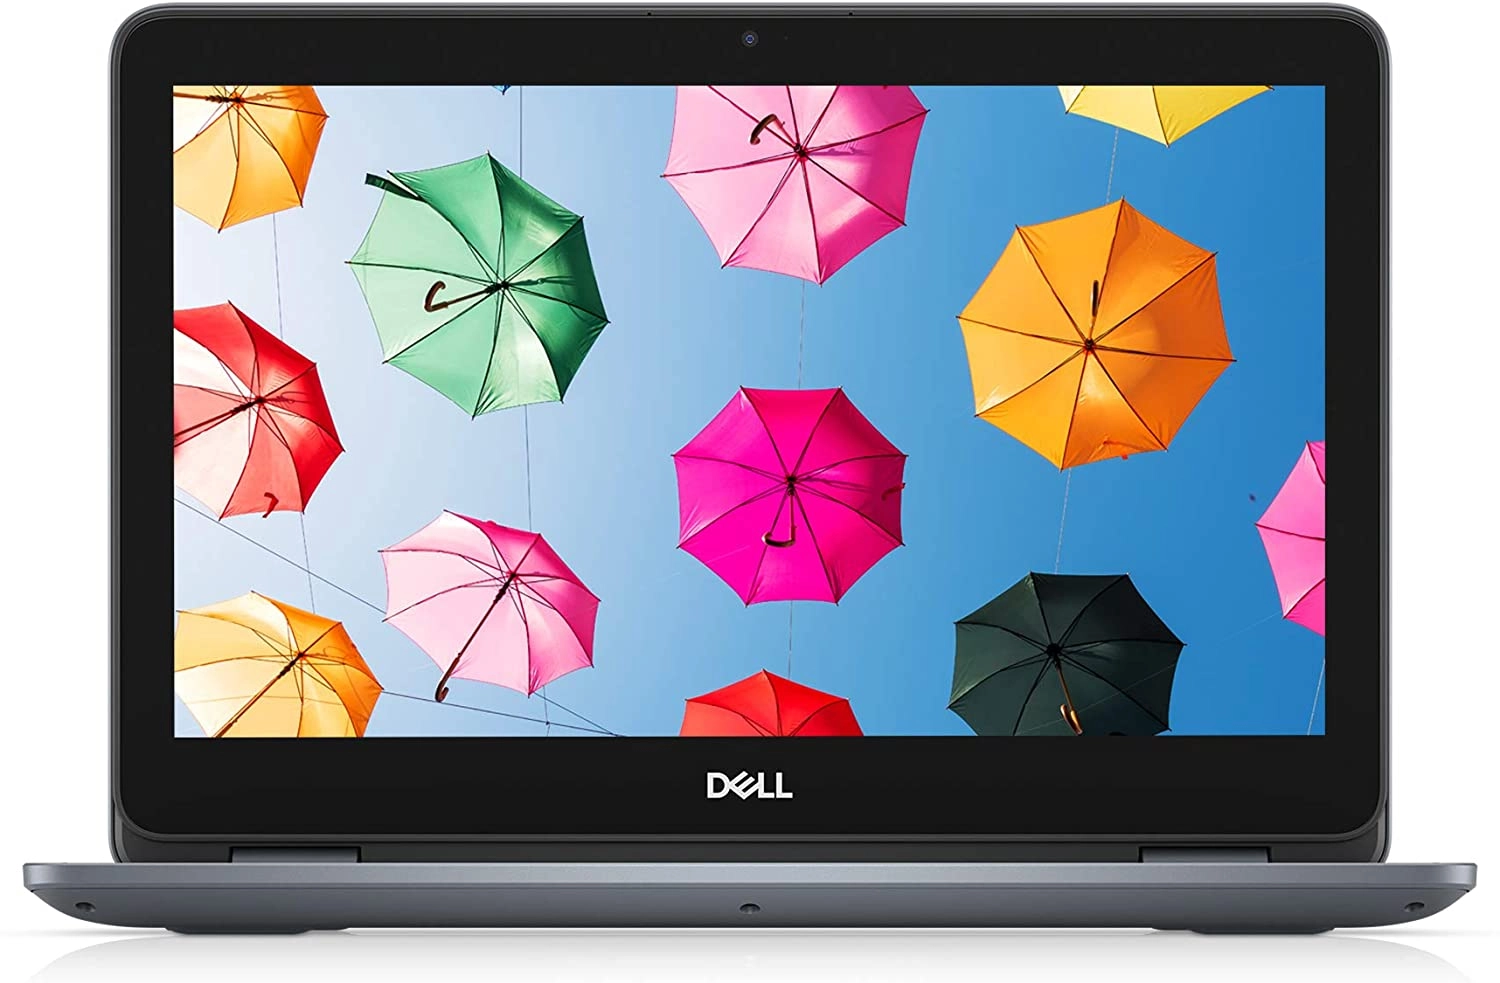 Dell Inspiron 11 3195 2 in 1 laptop image